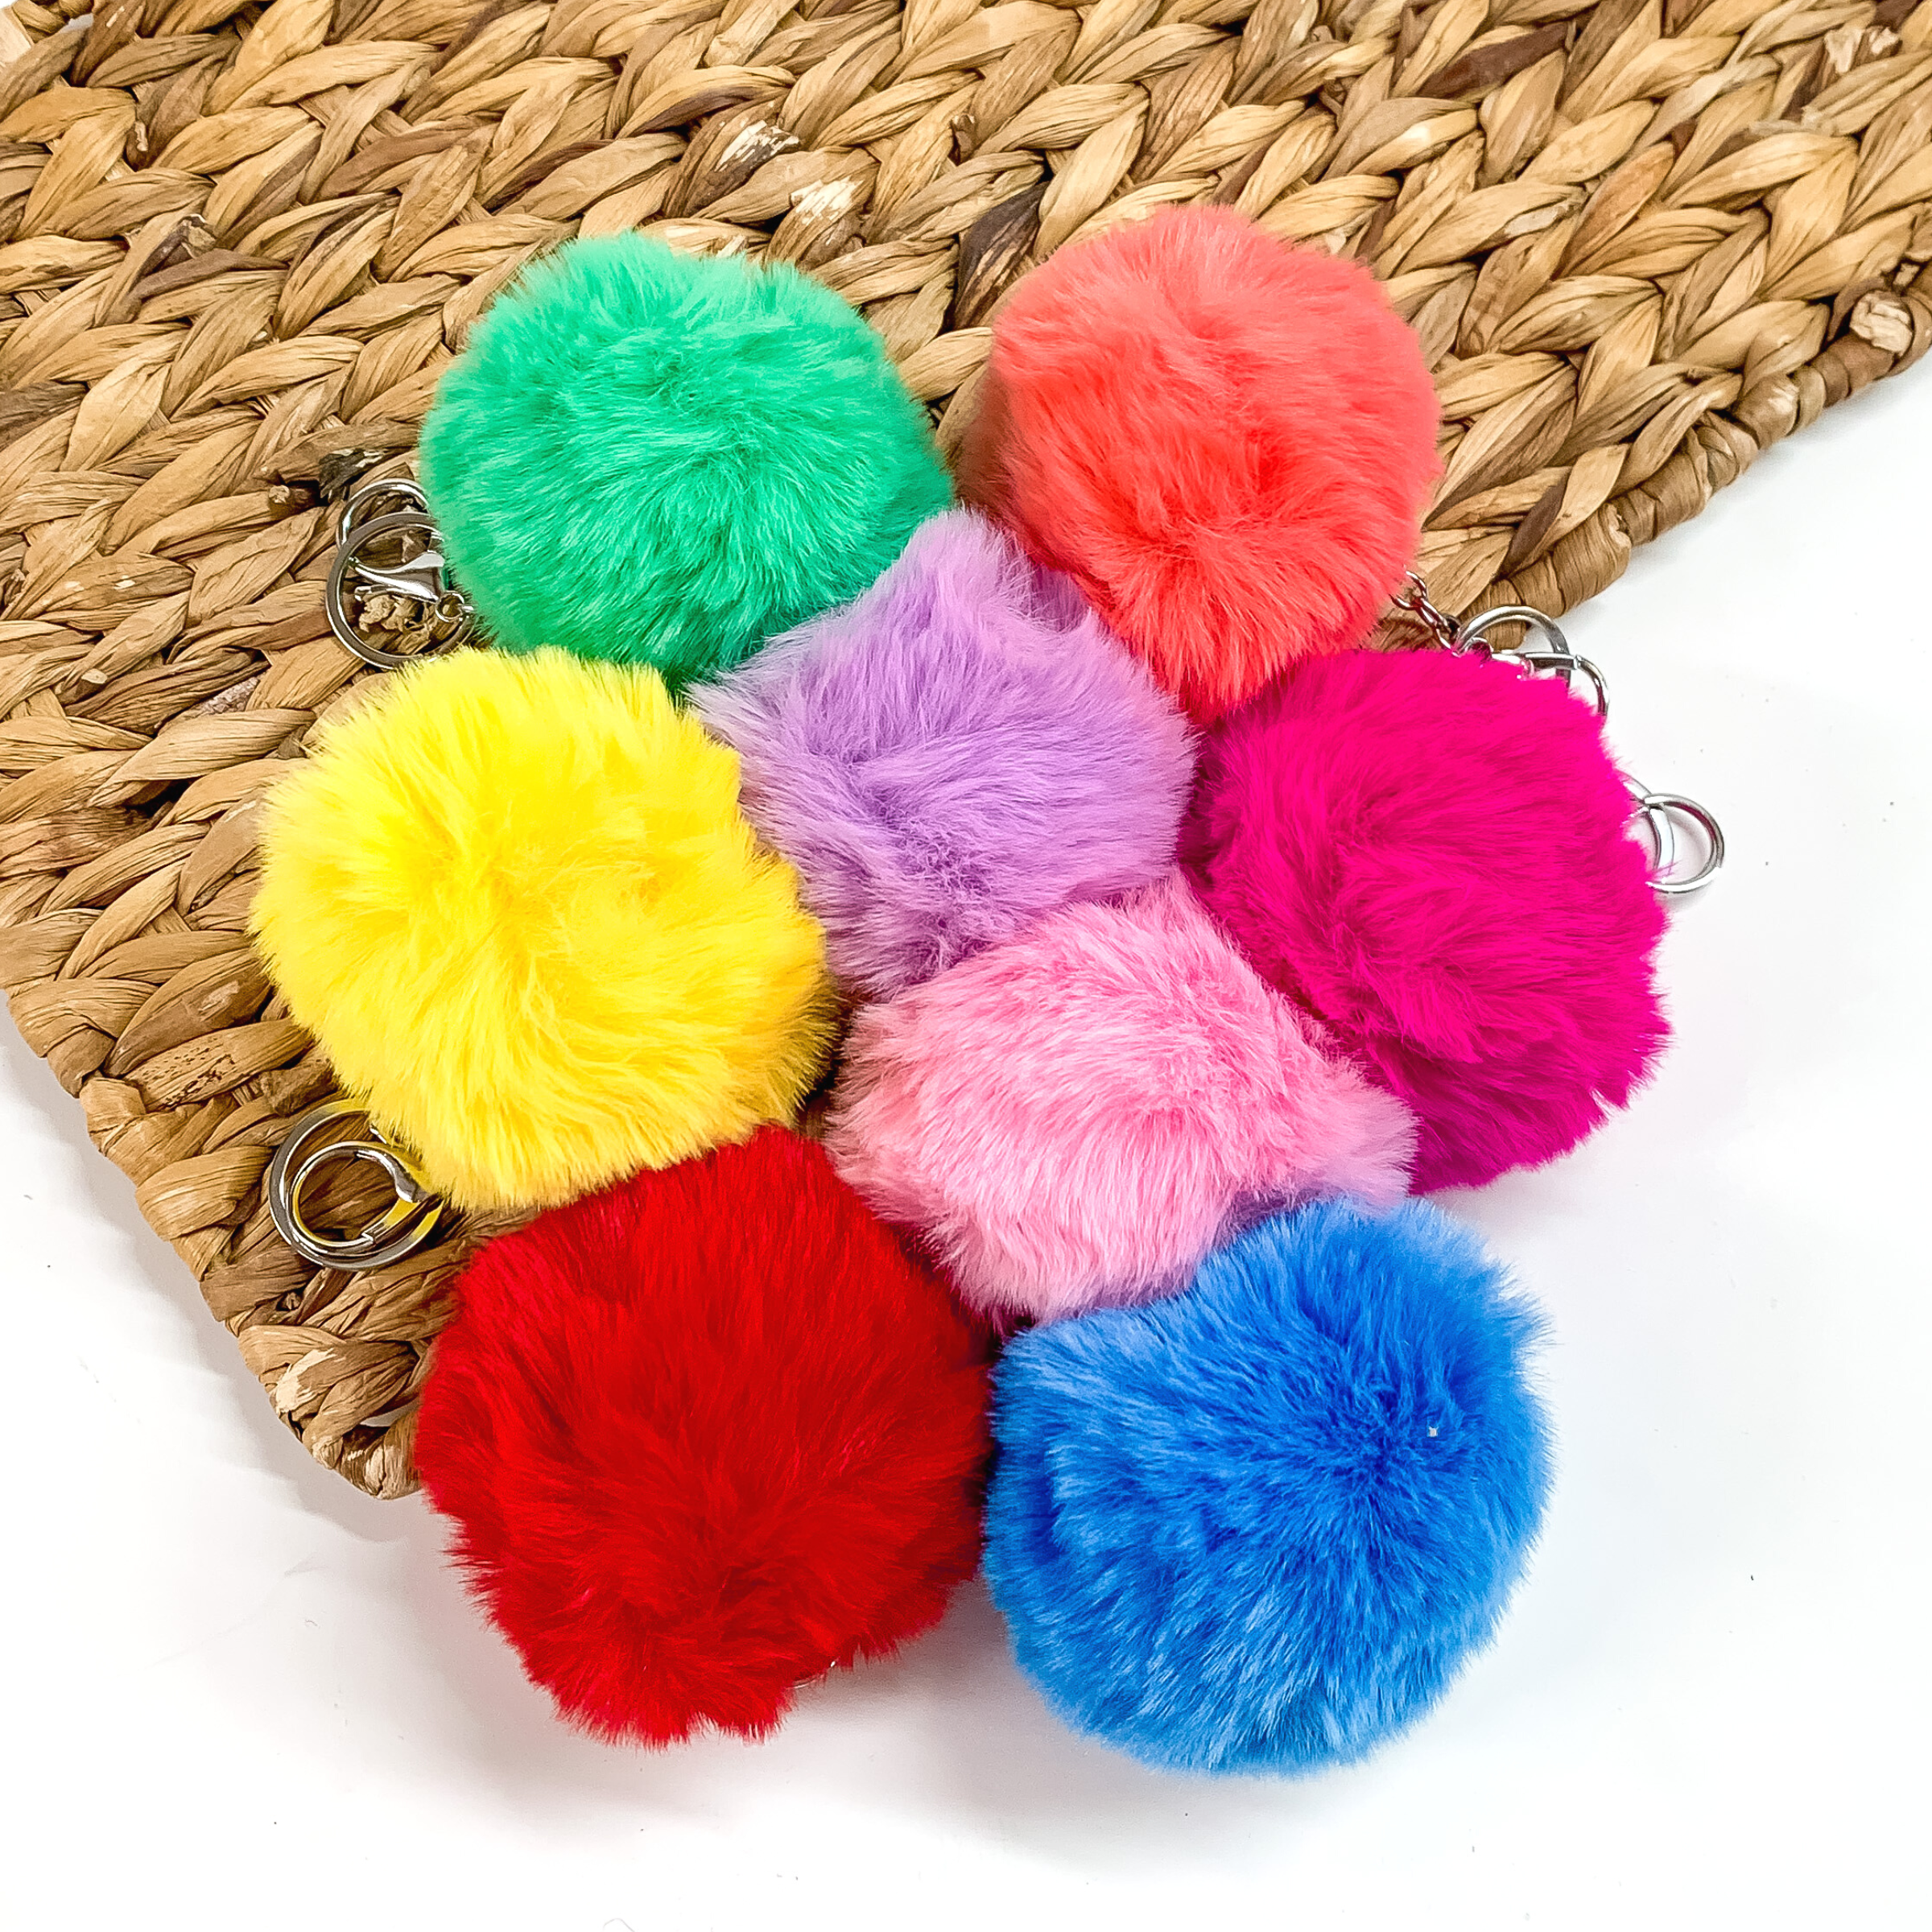 There are eight different colored puff ball keychains with a silver chain. There is green, coral, yellow, light purple, hot pink, light pink, red, and blue. These puff ball keychains are taken partly on a brown woven slab and on a white background.